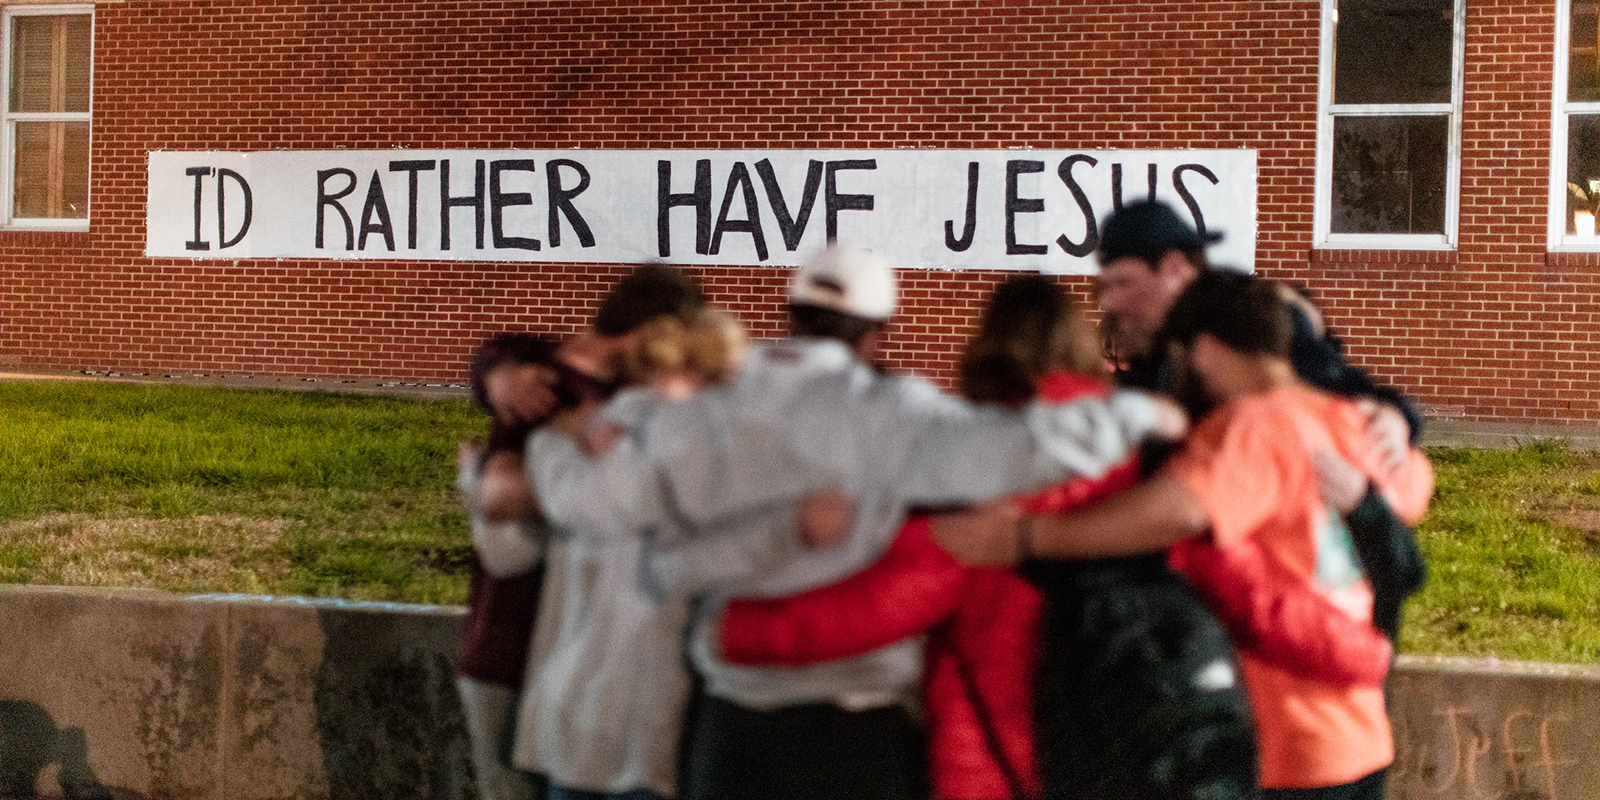 Students pray together on Fountain Mall in front of a sign that reads "I'd rather have Jesus"